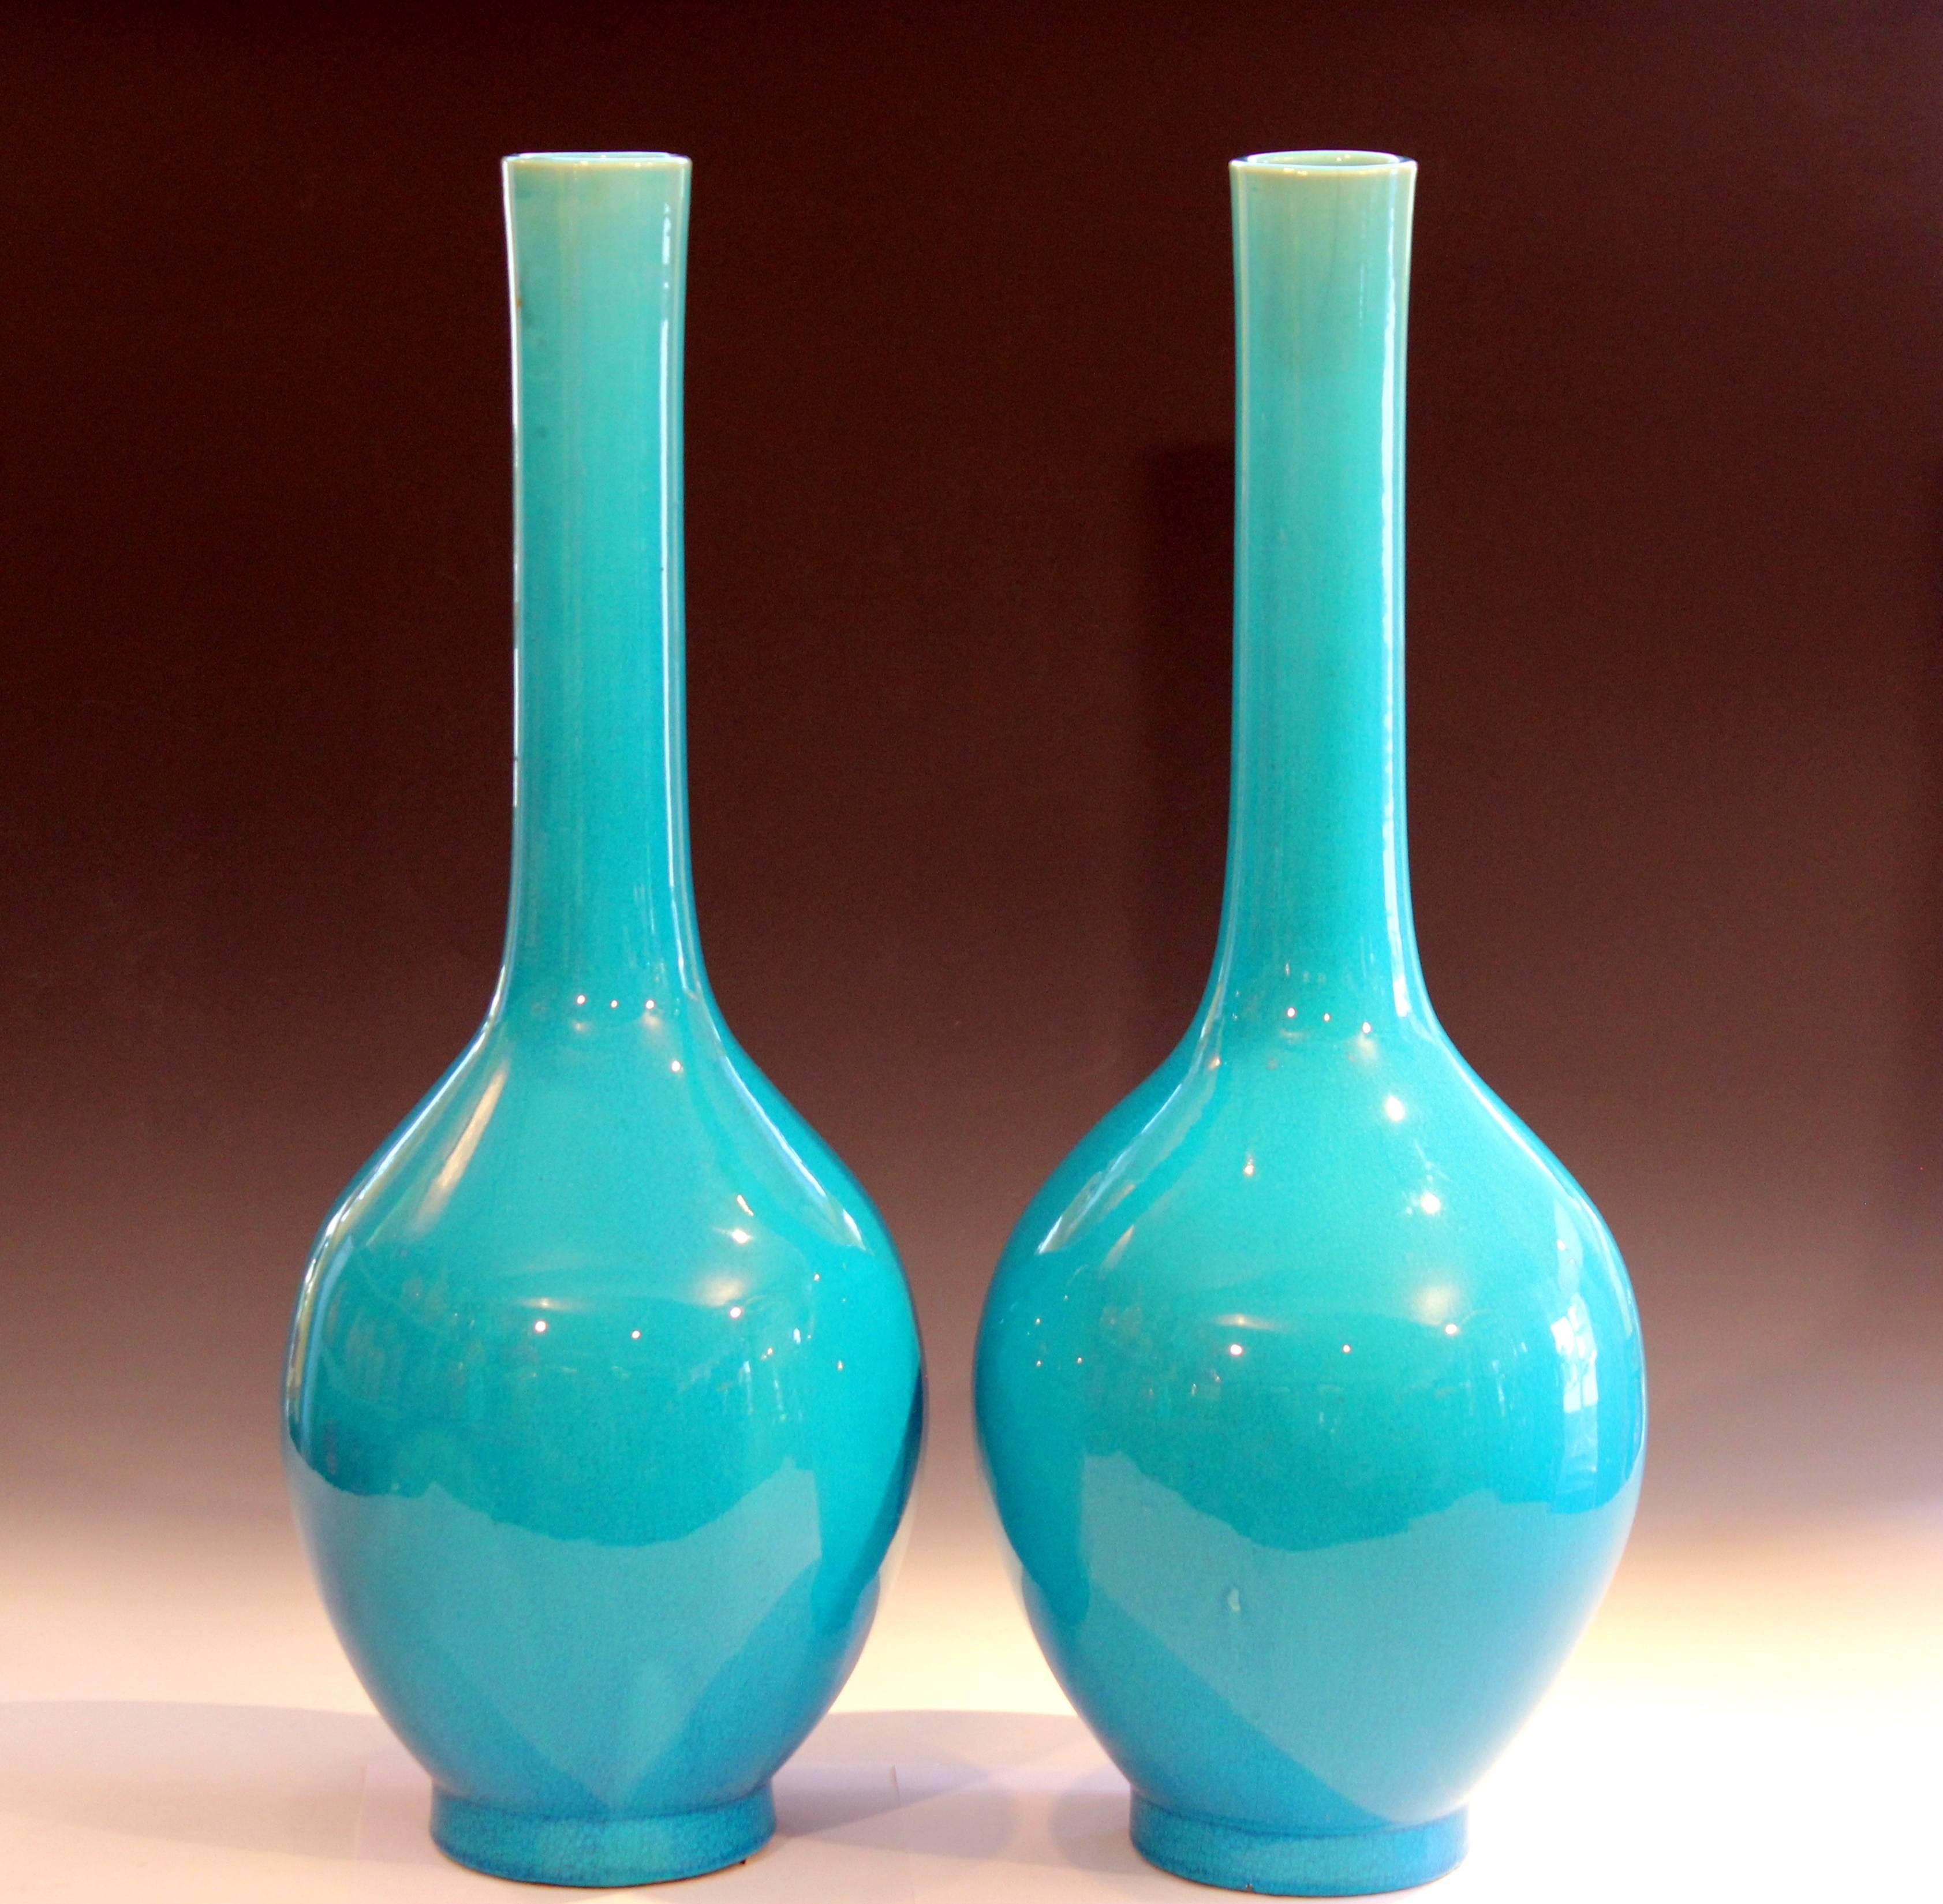 Large pair of antique Japanese Awaji type bottle vases from the city of Kyoto, circa 1910s. Sensuous forms with unusually brilliant and even turquoise crackle glaze. Measure: 24